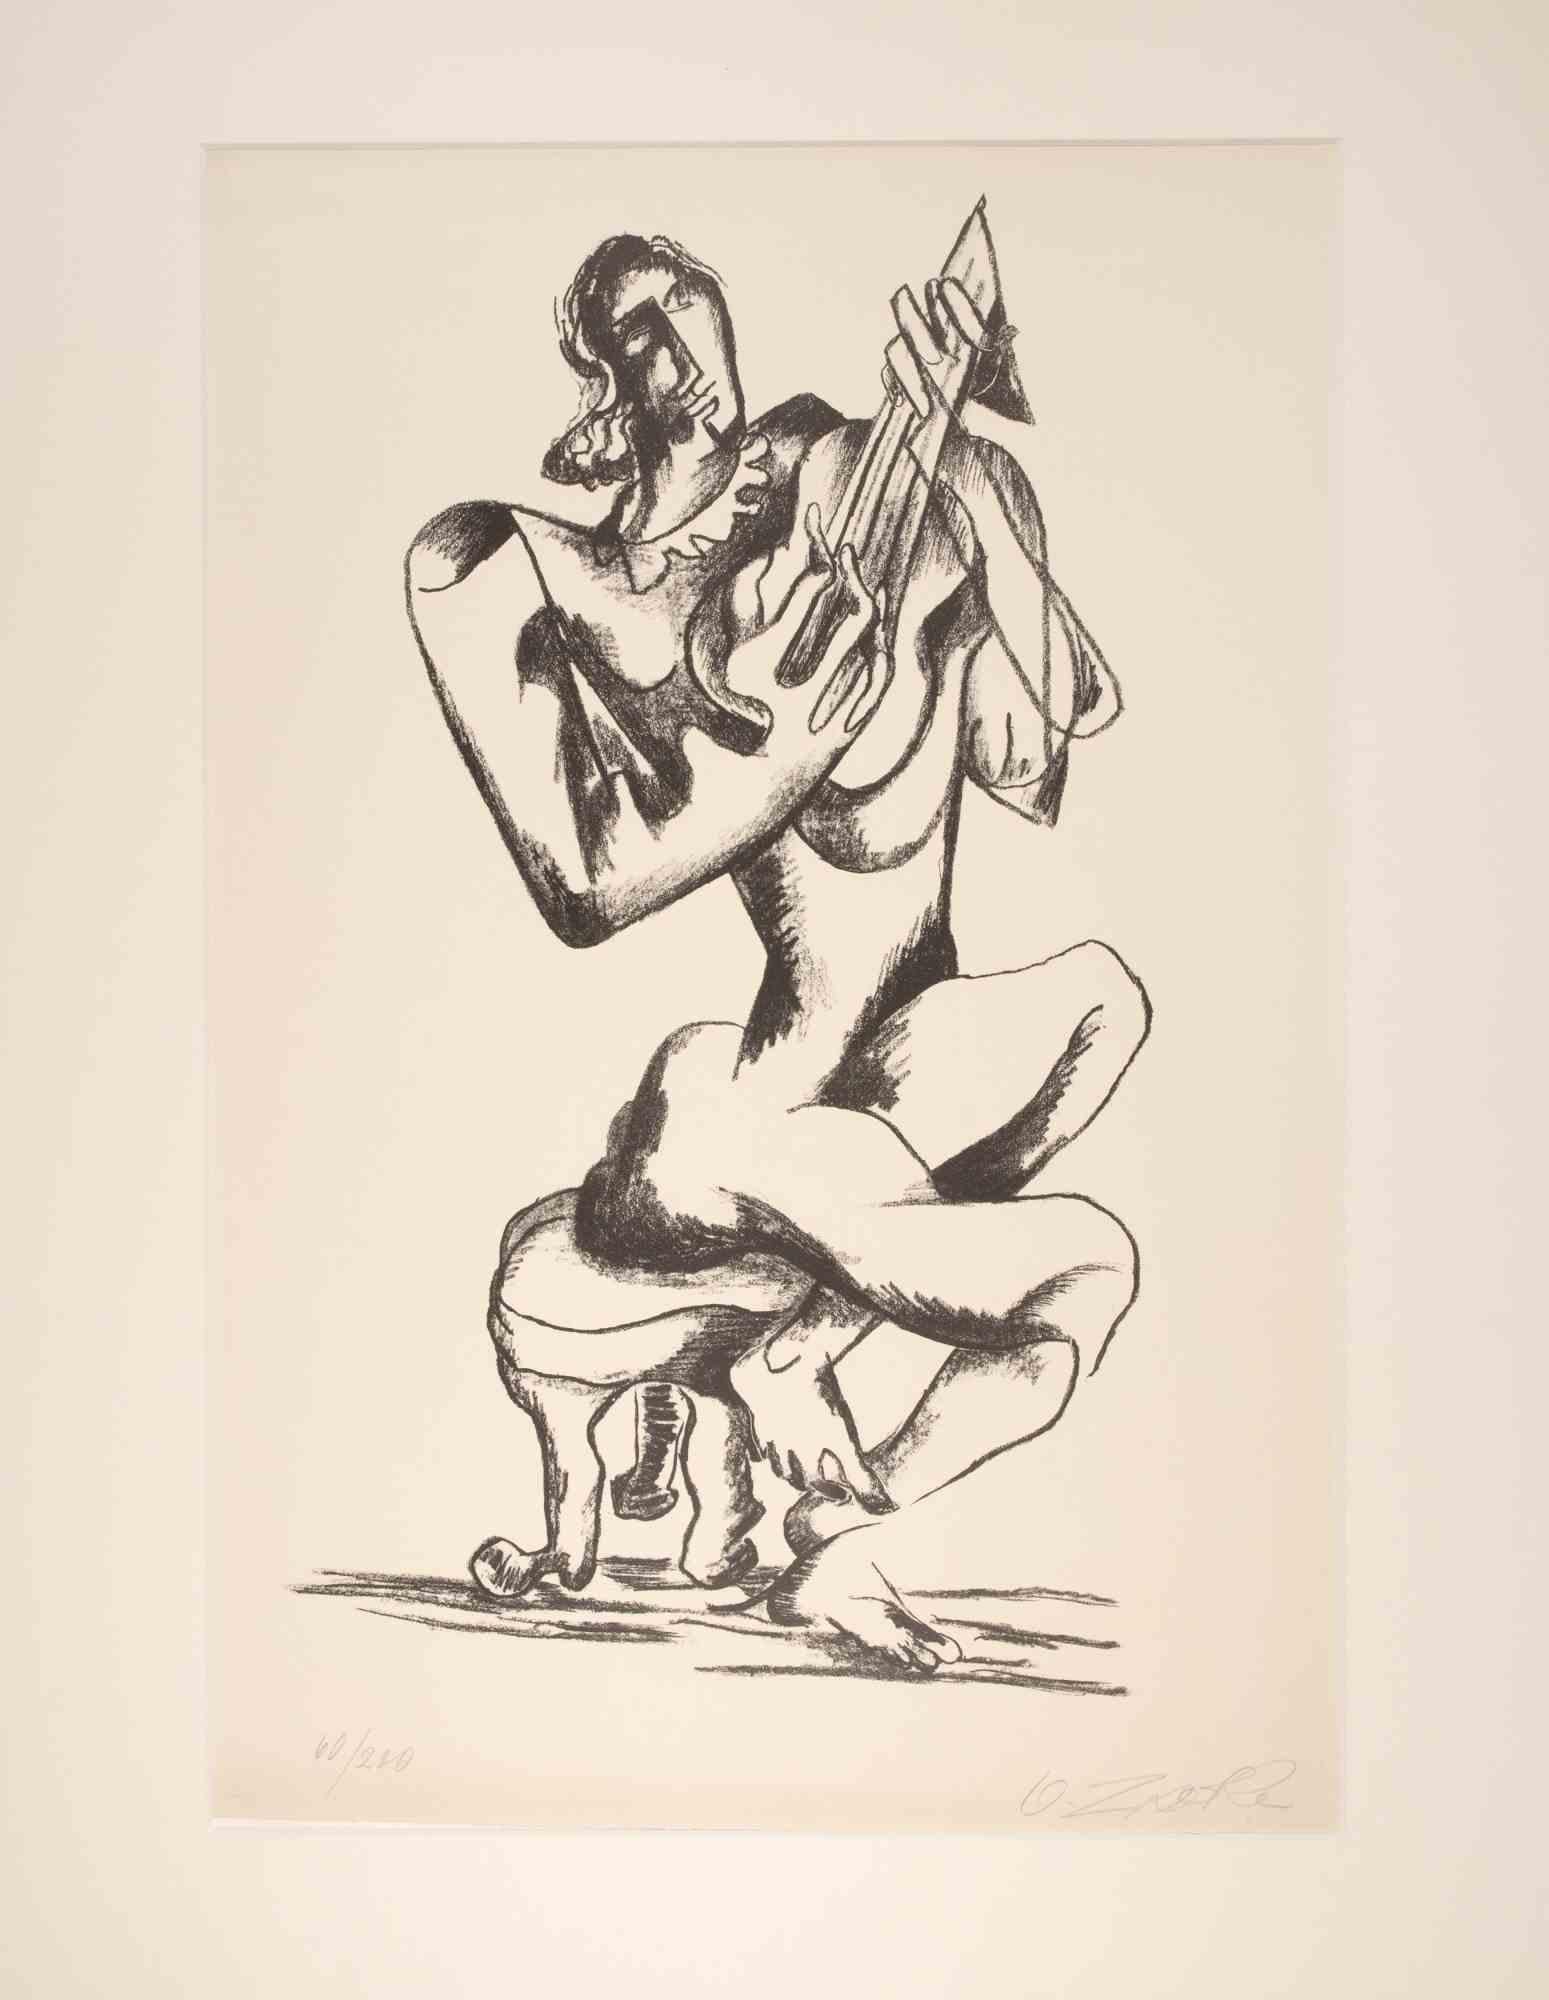  Lute Player - Lithograph by Ossip Zadkine - mid-20th Century For Sale 1